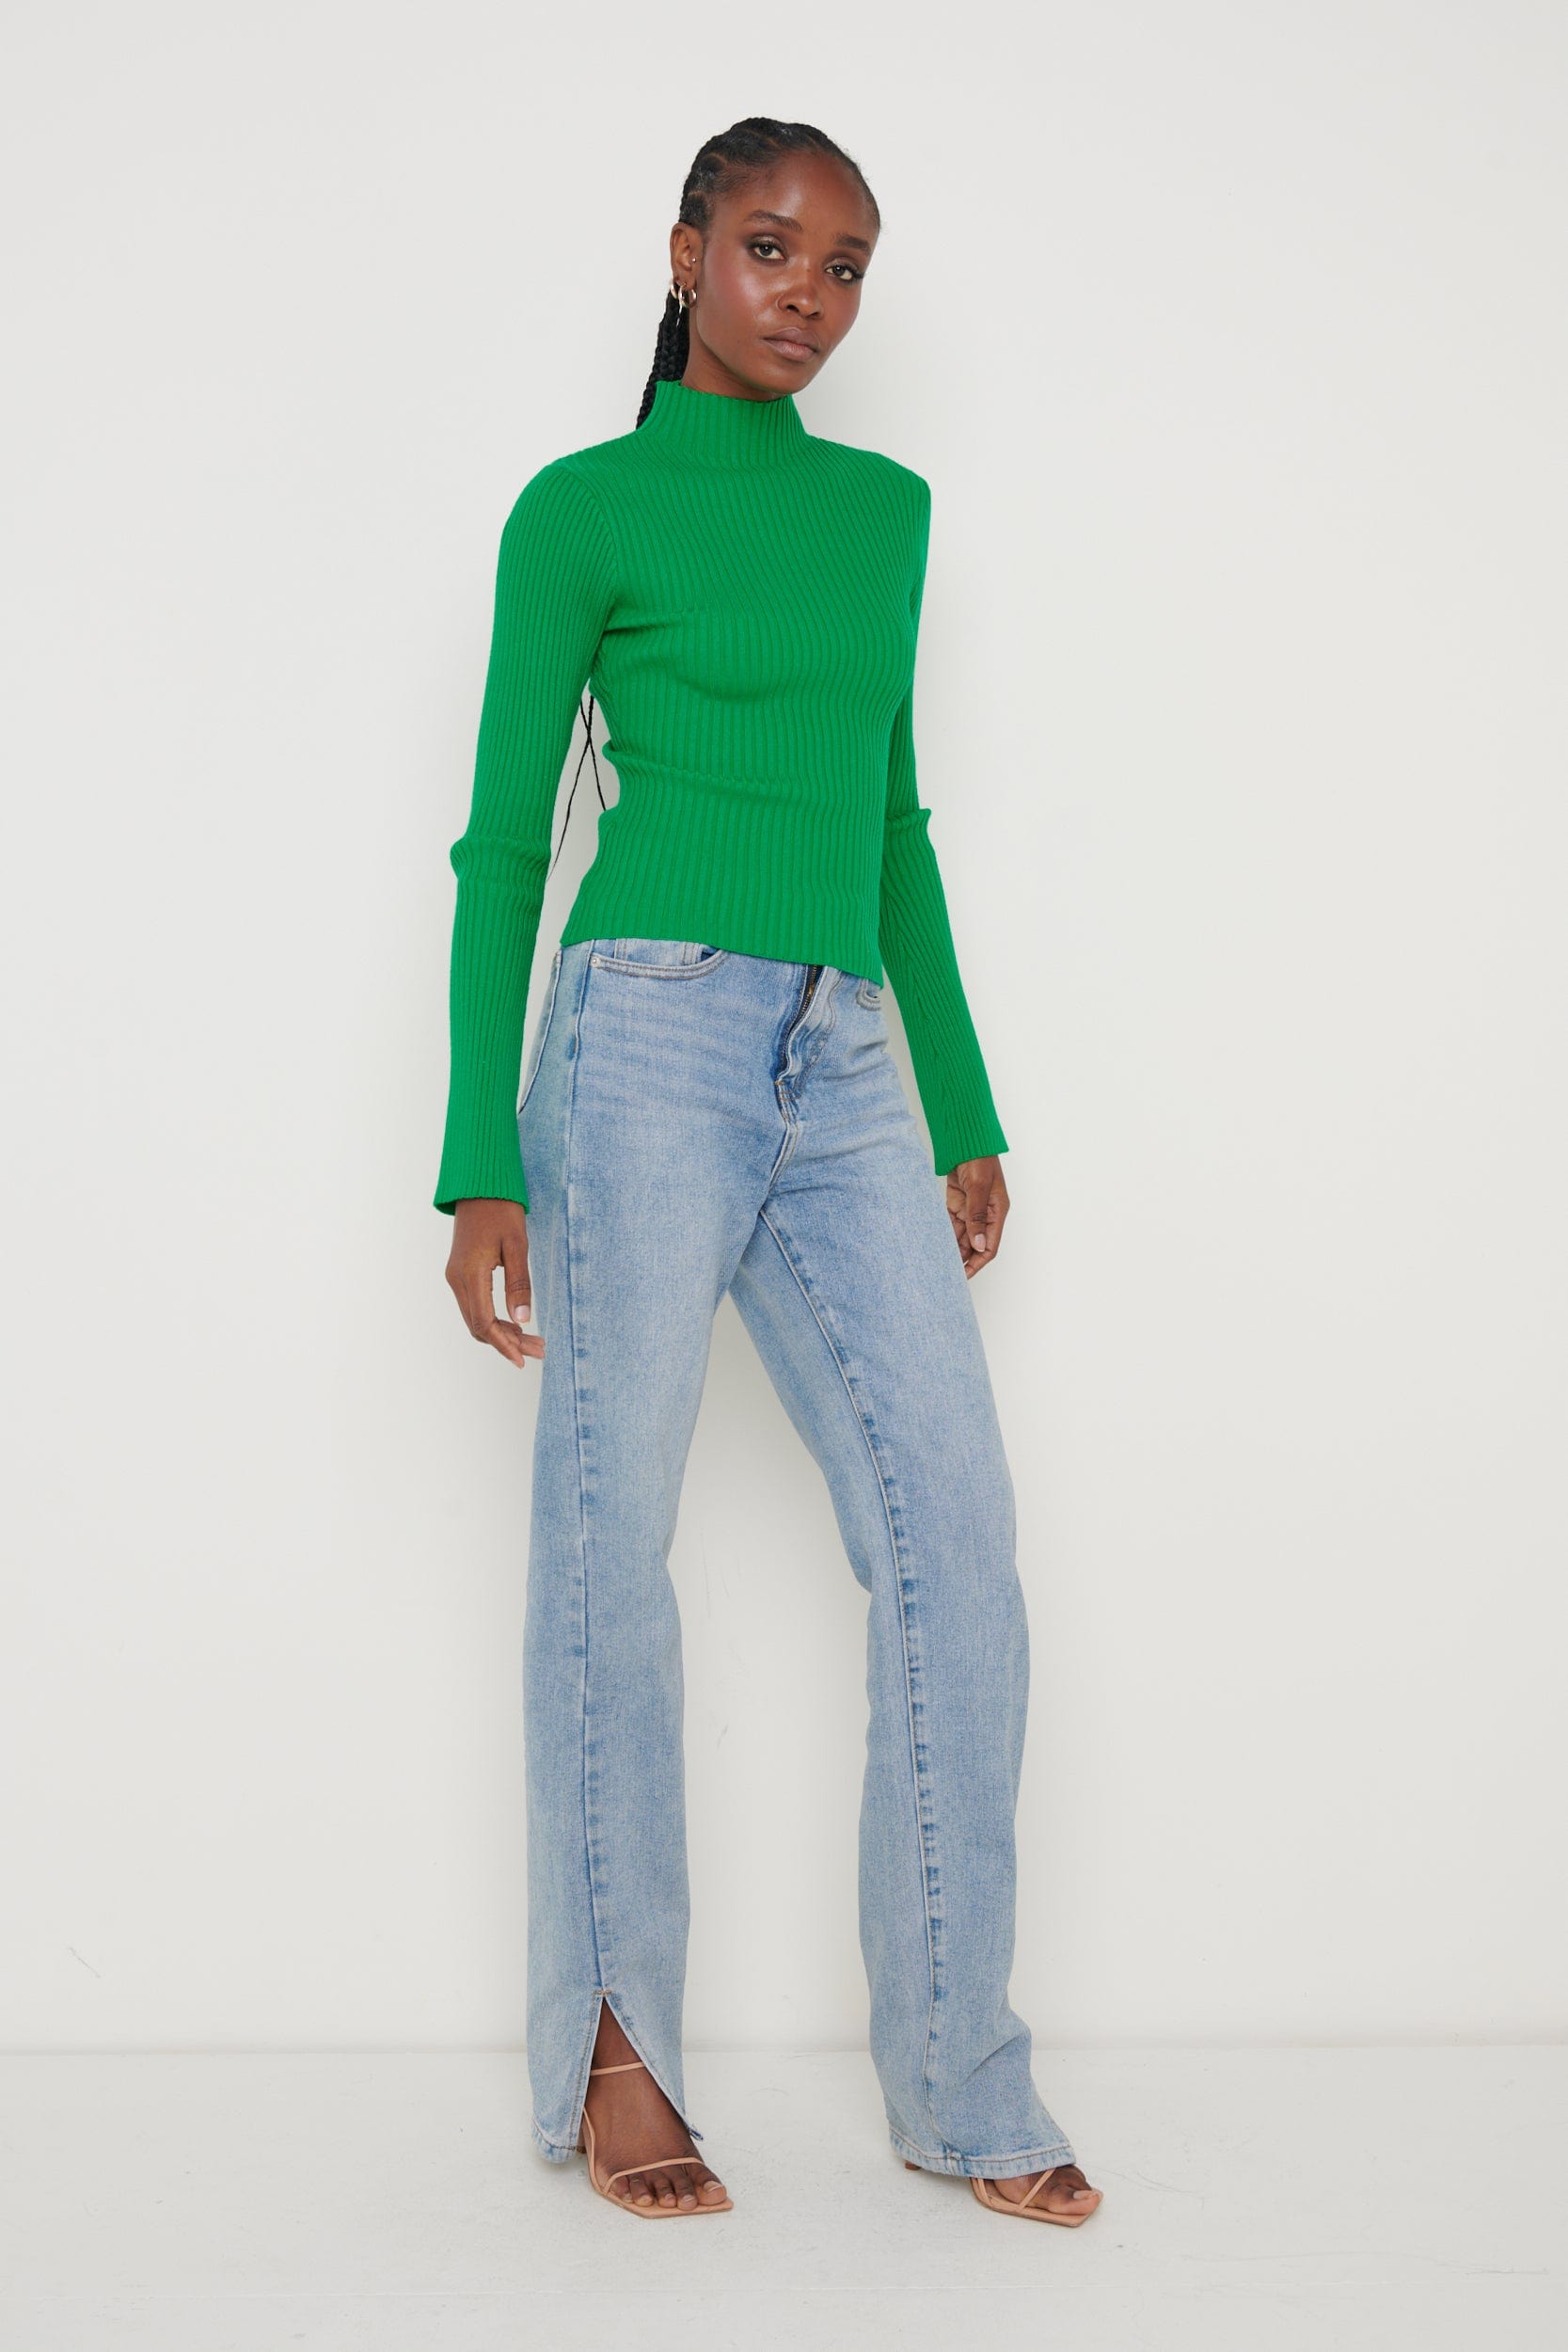 Abbey Ribbed Grown Neck Top - Bright Green